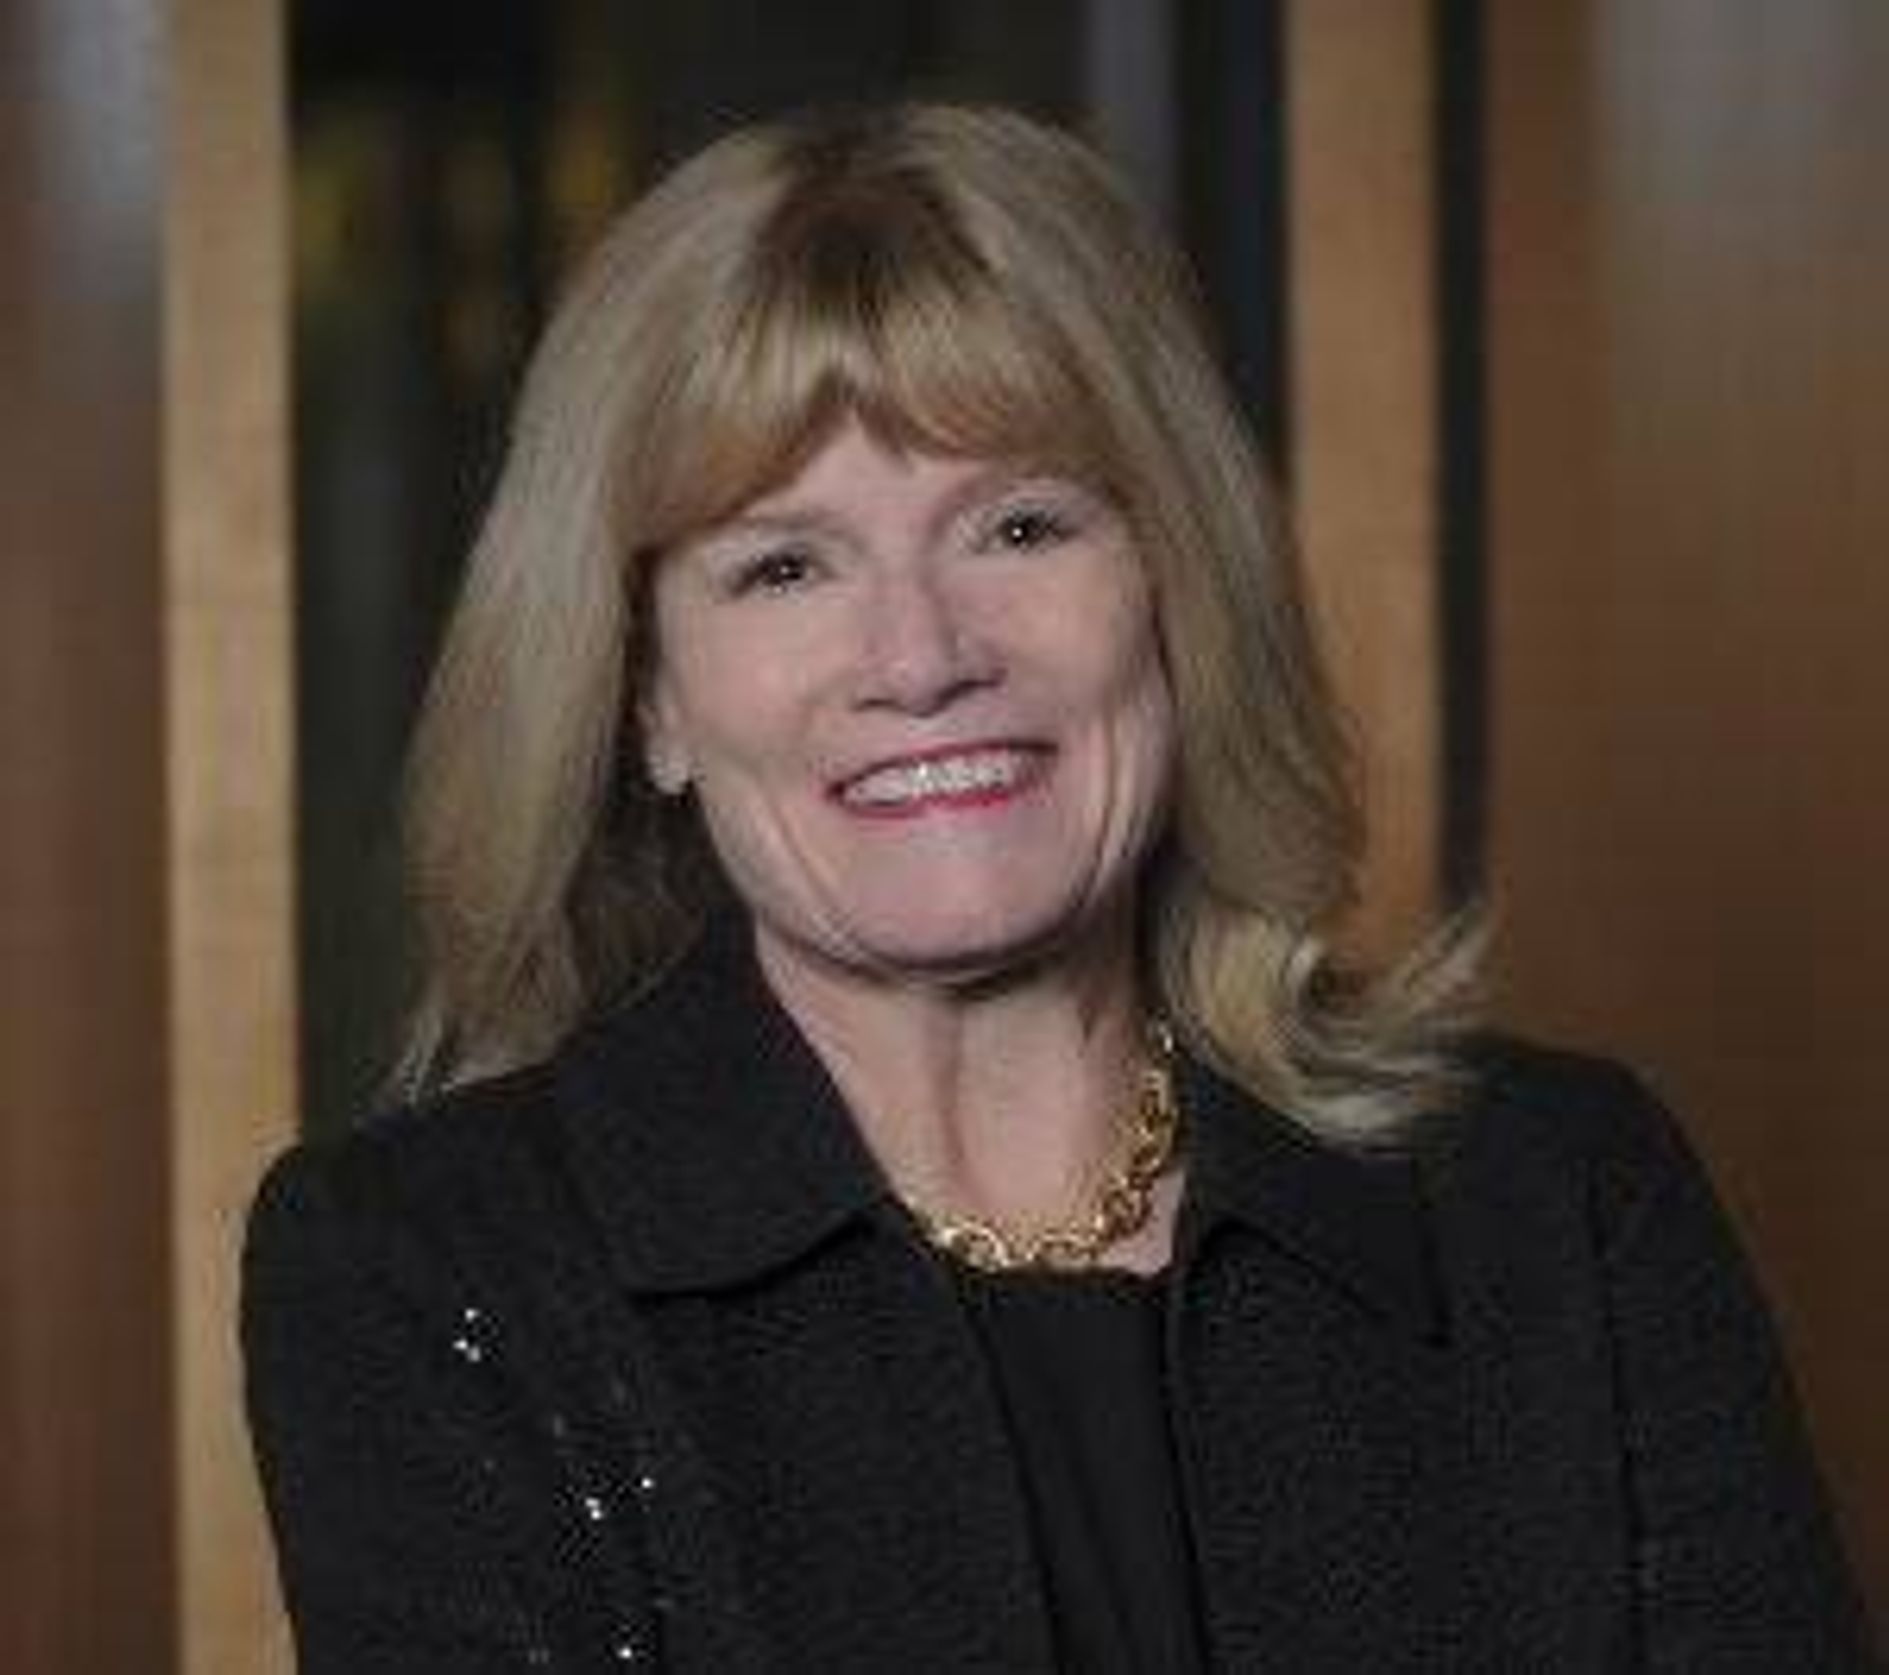 Terry Fulmer, president of the John A. Hartford Foundation